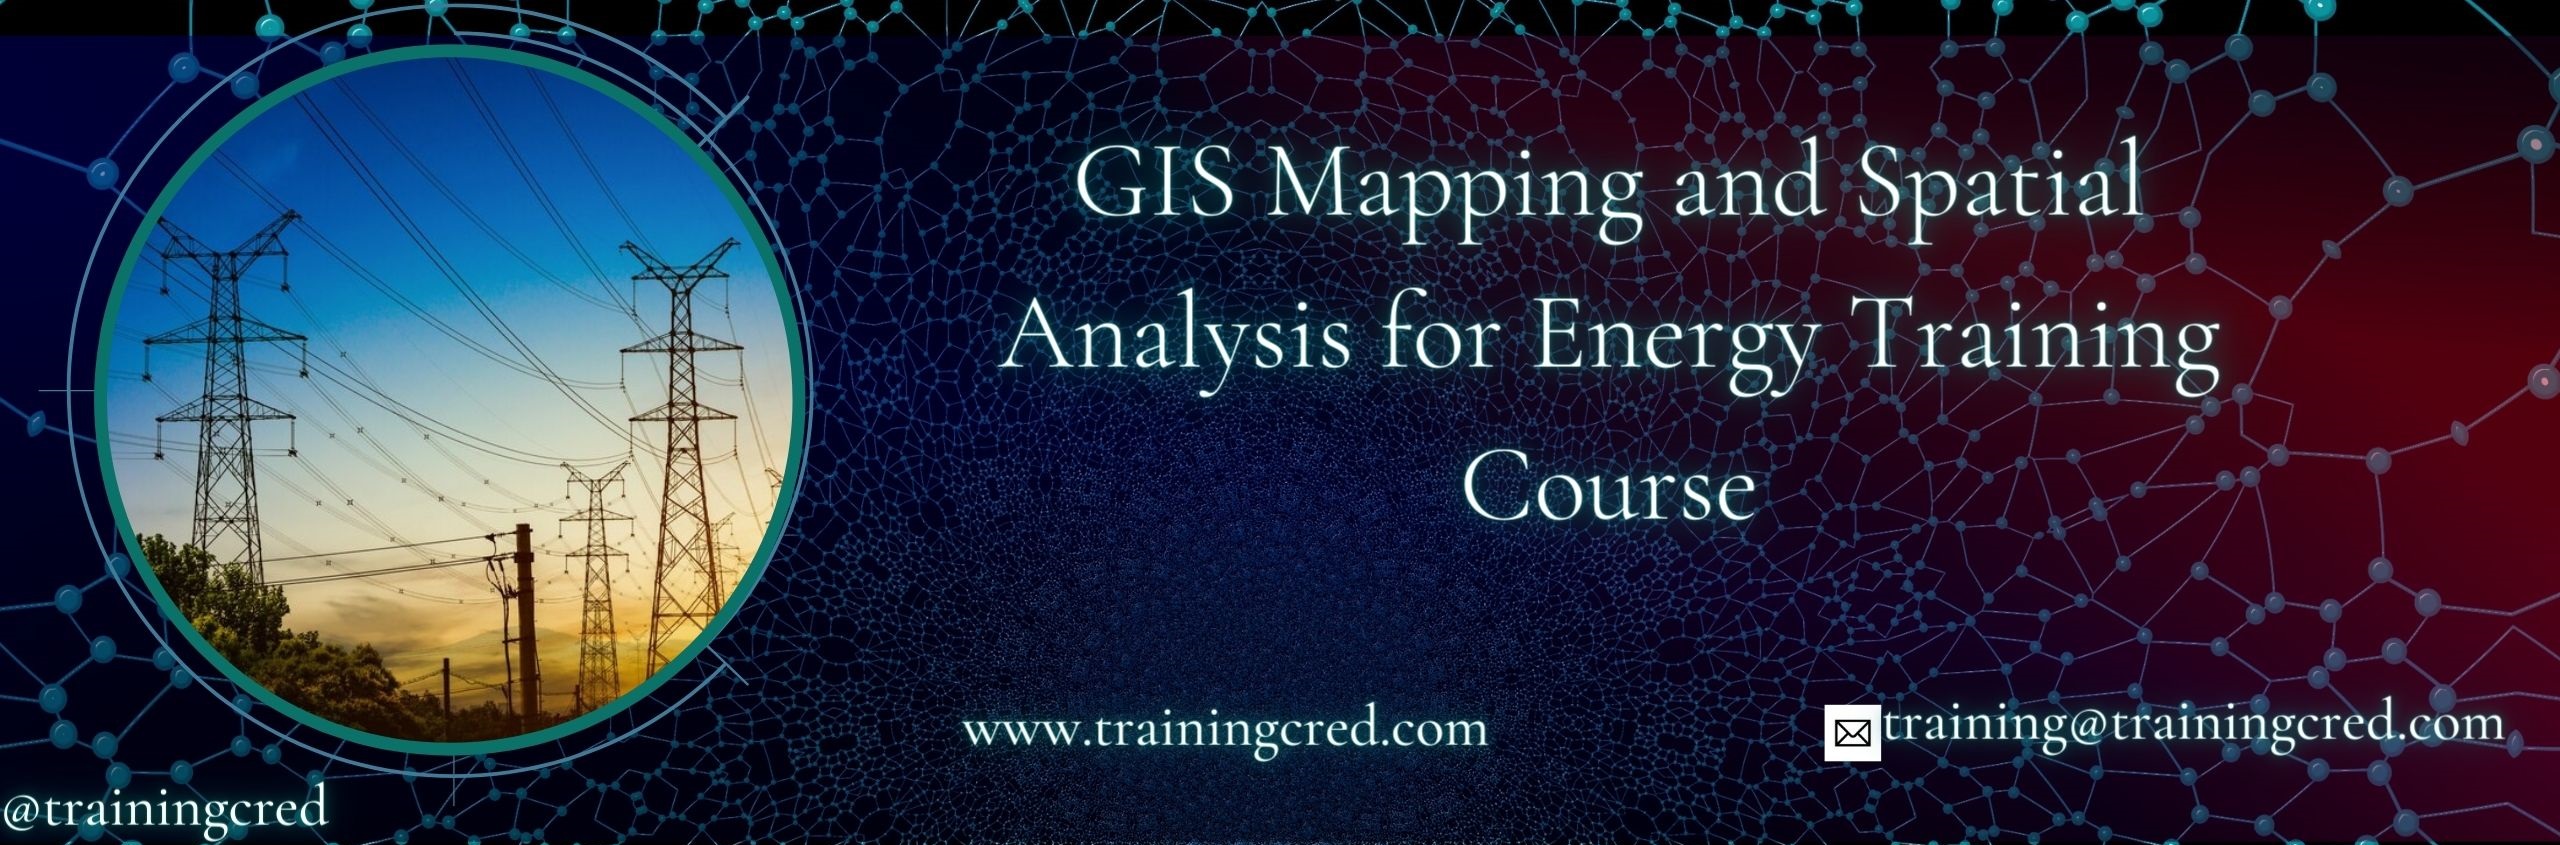 GIS Mapping and Spatial Analysis for Energy Training